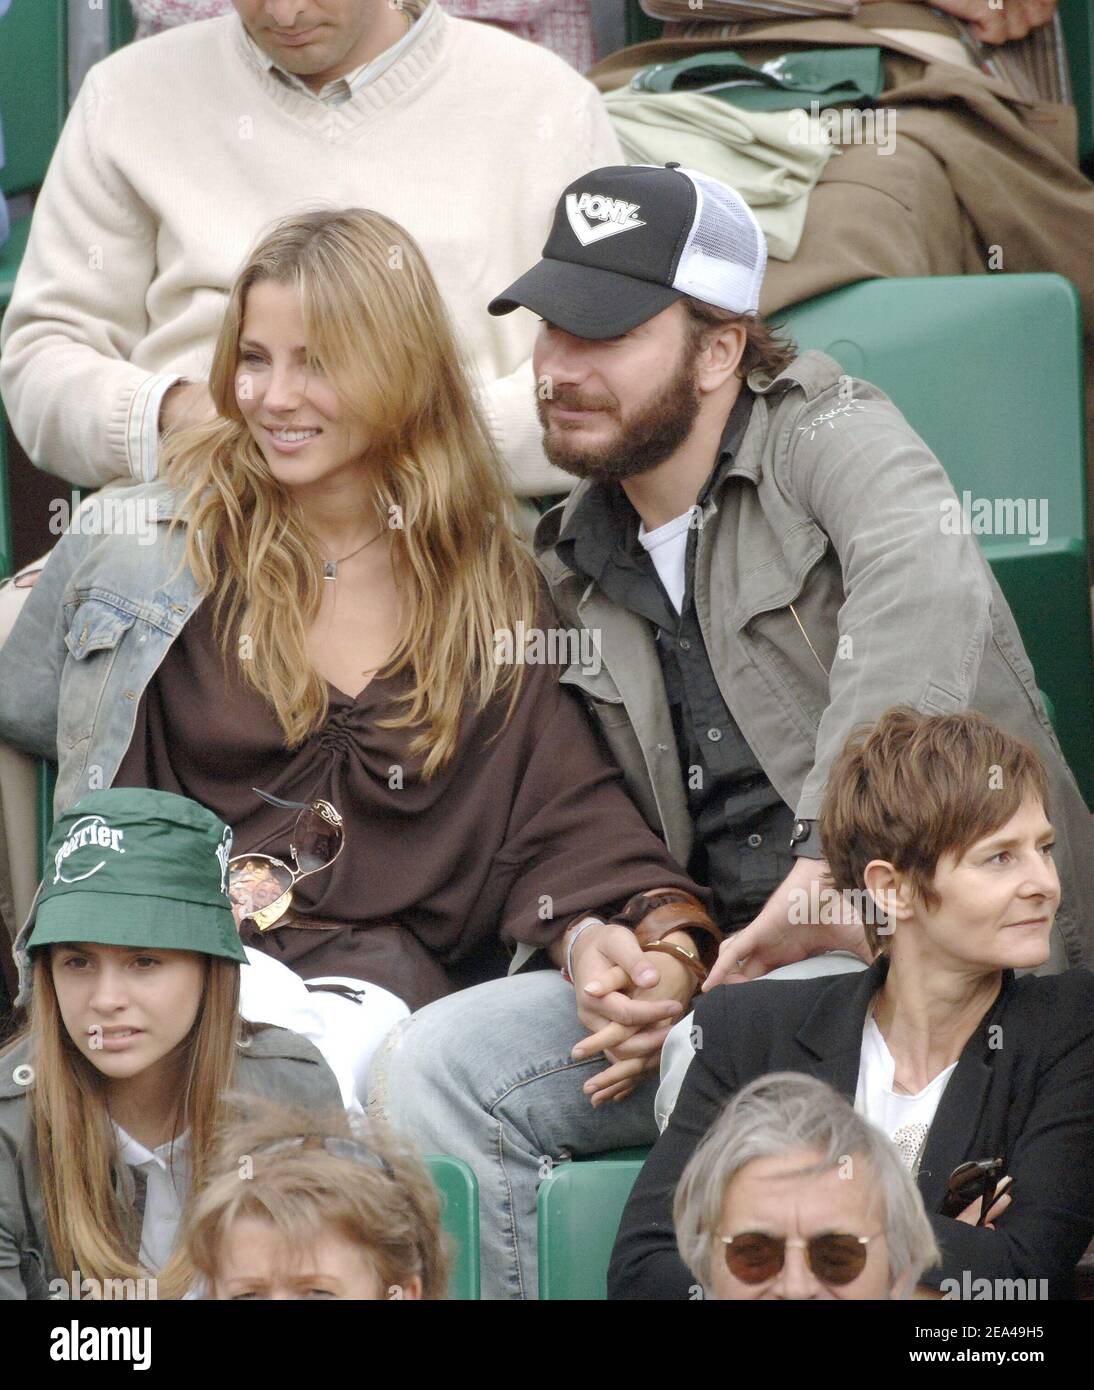 French actor Michael Youn and his girlfriend Spanish actress Elsa Pataky  attend the match between Spain's Rafael Nadal and Swiss Roger Federer in  the semi final of the French Open at the